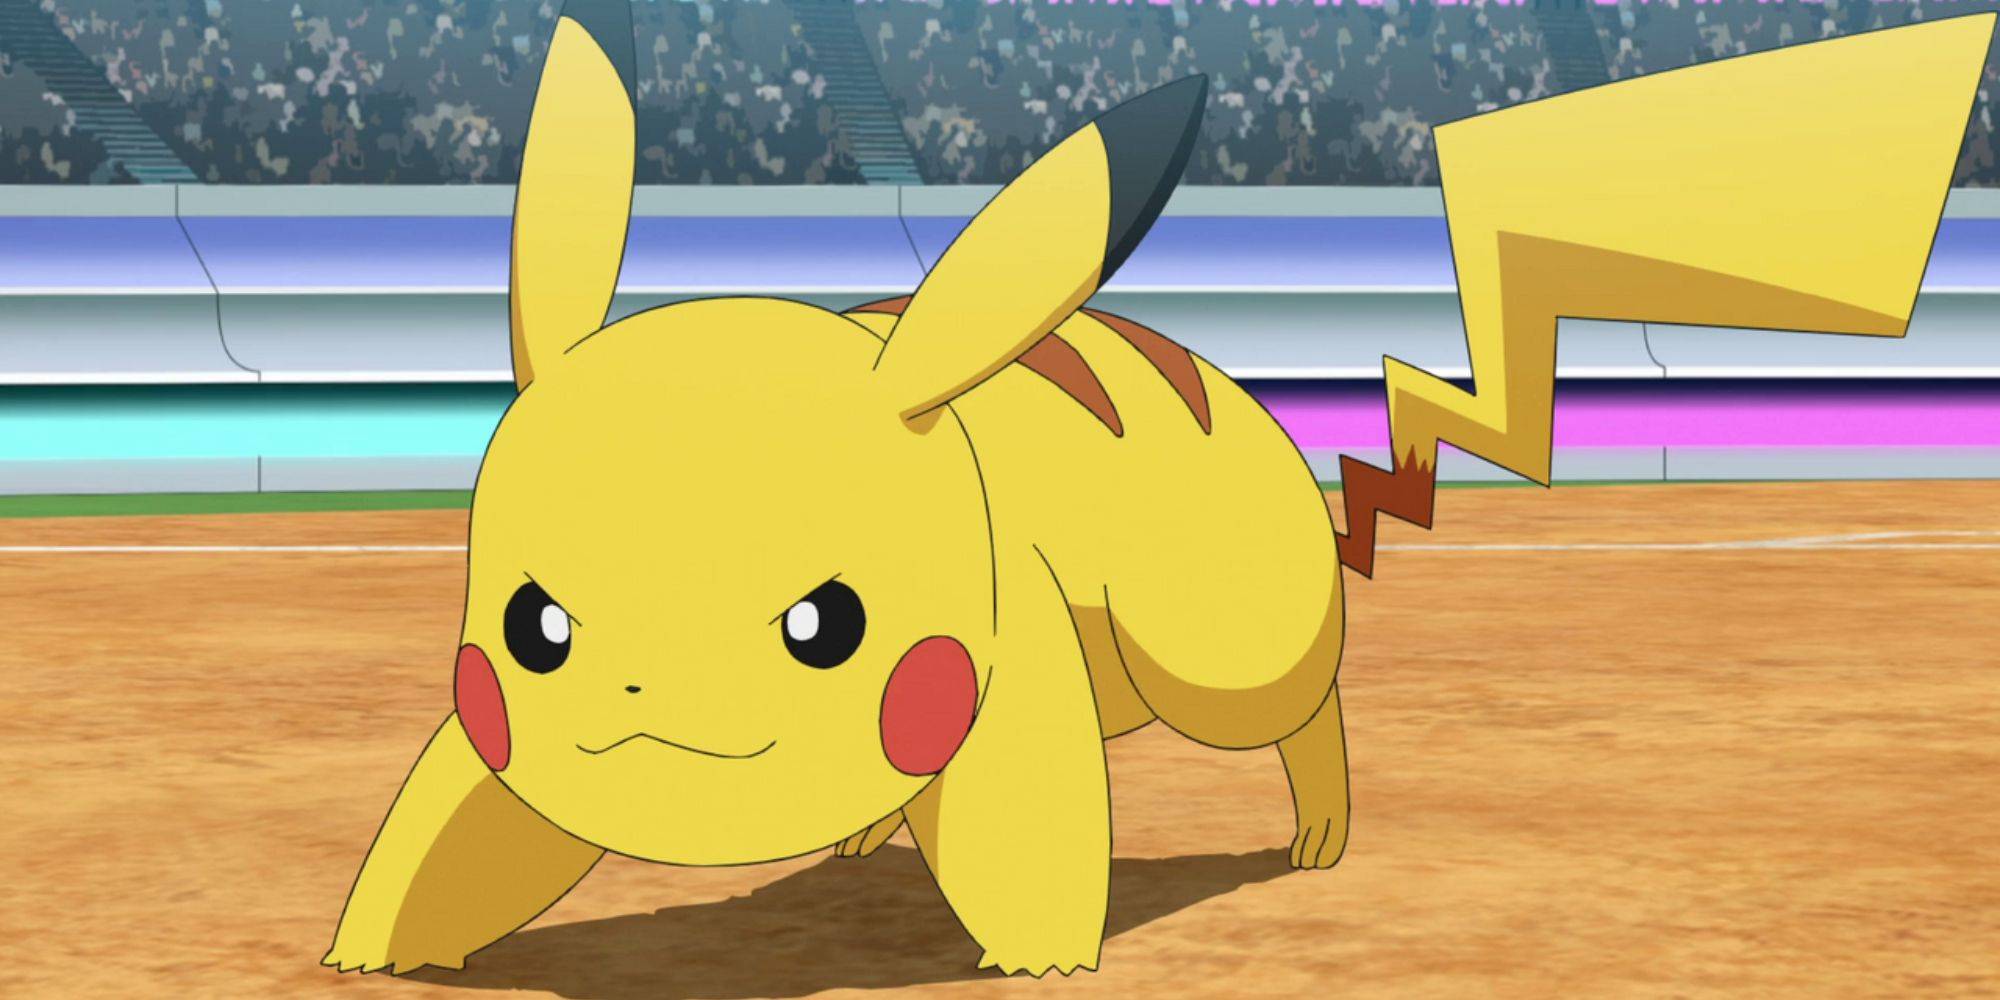 Pikachu ready to battle in a stadium